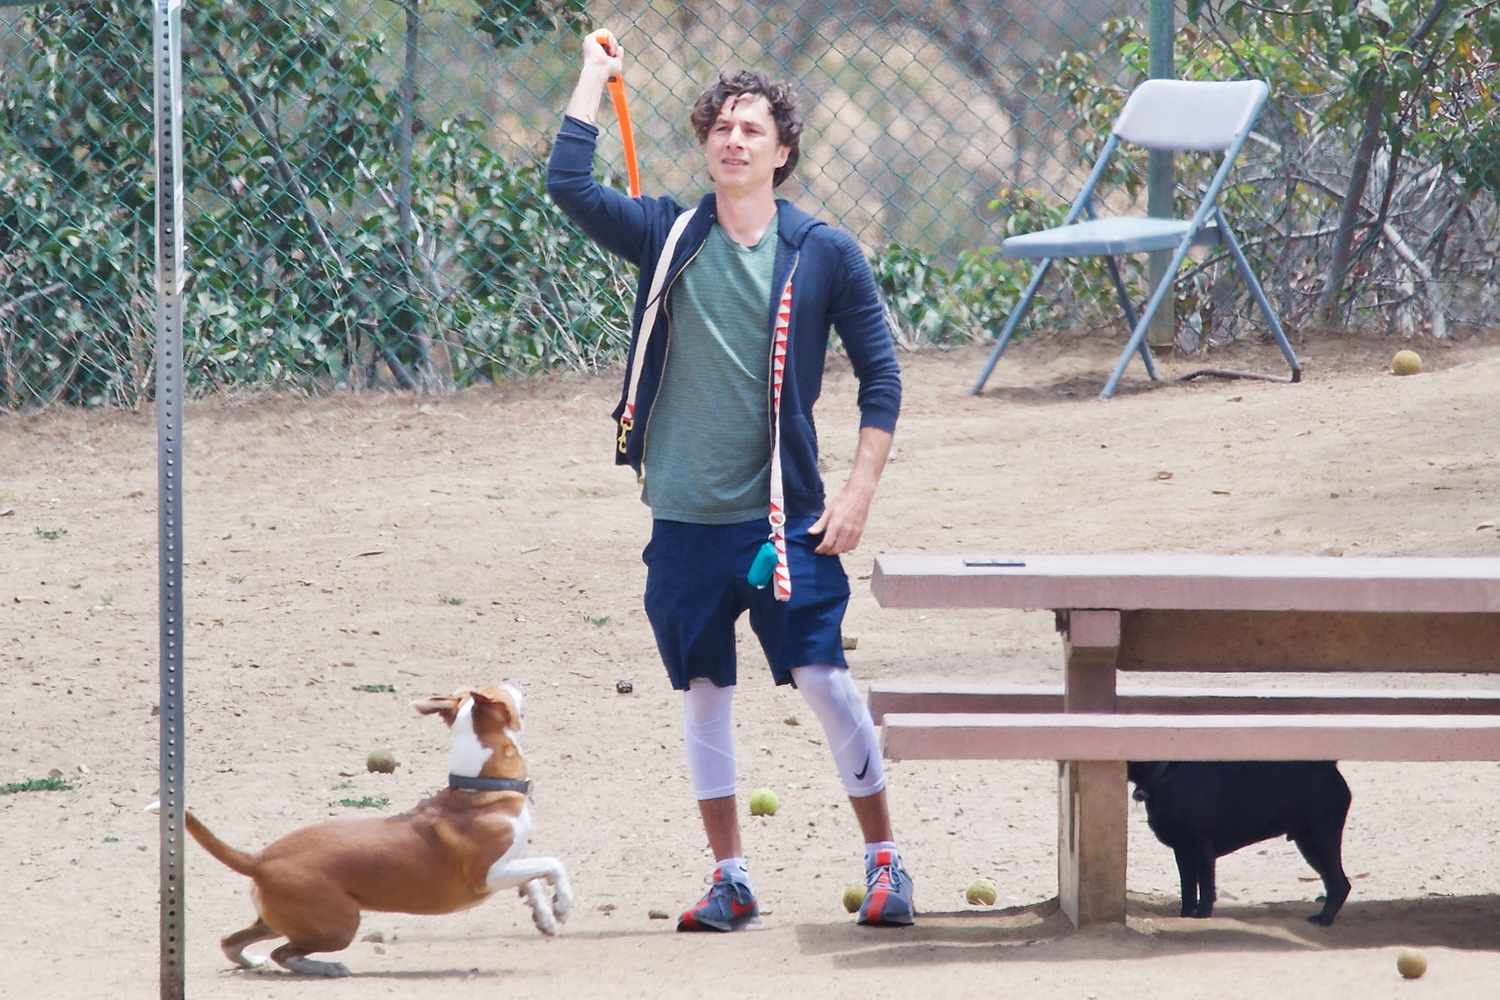 Zach Braff Gets Close To Mystery Woman As They Spend Time Together At The Dog Park While Florence Pugh Is Overseas Filming.